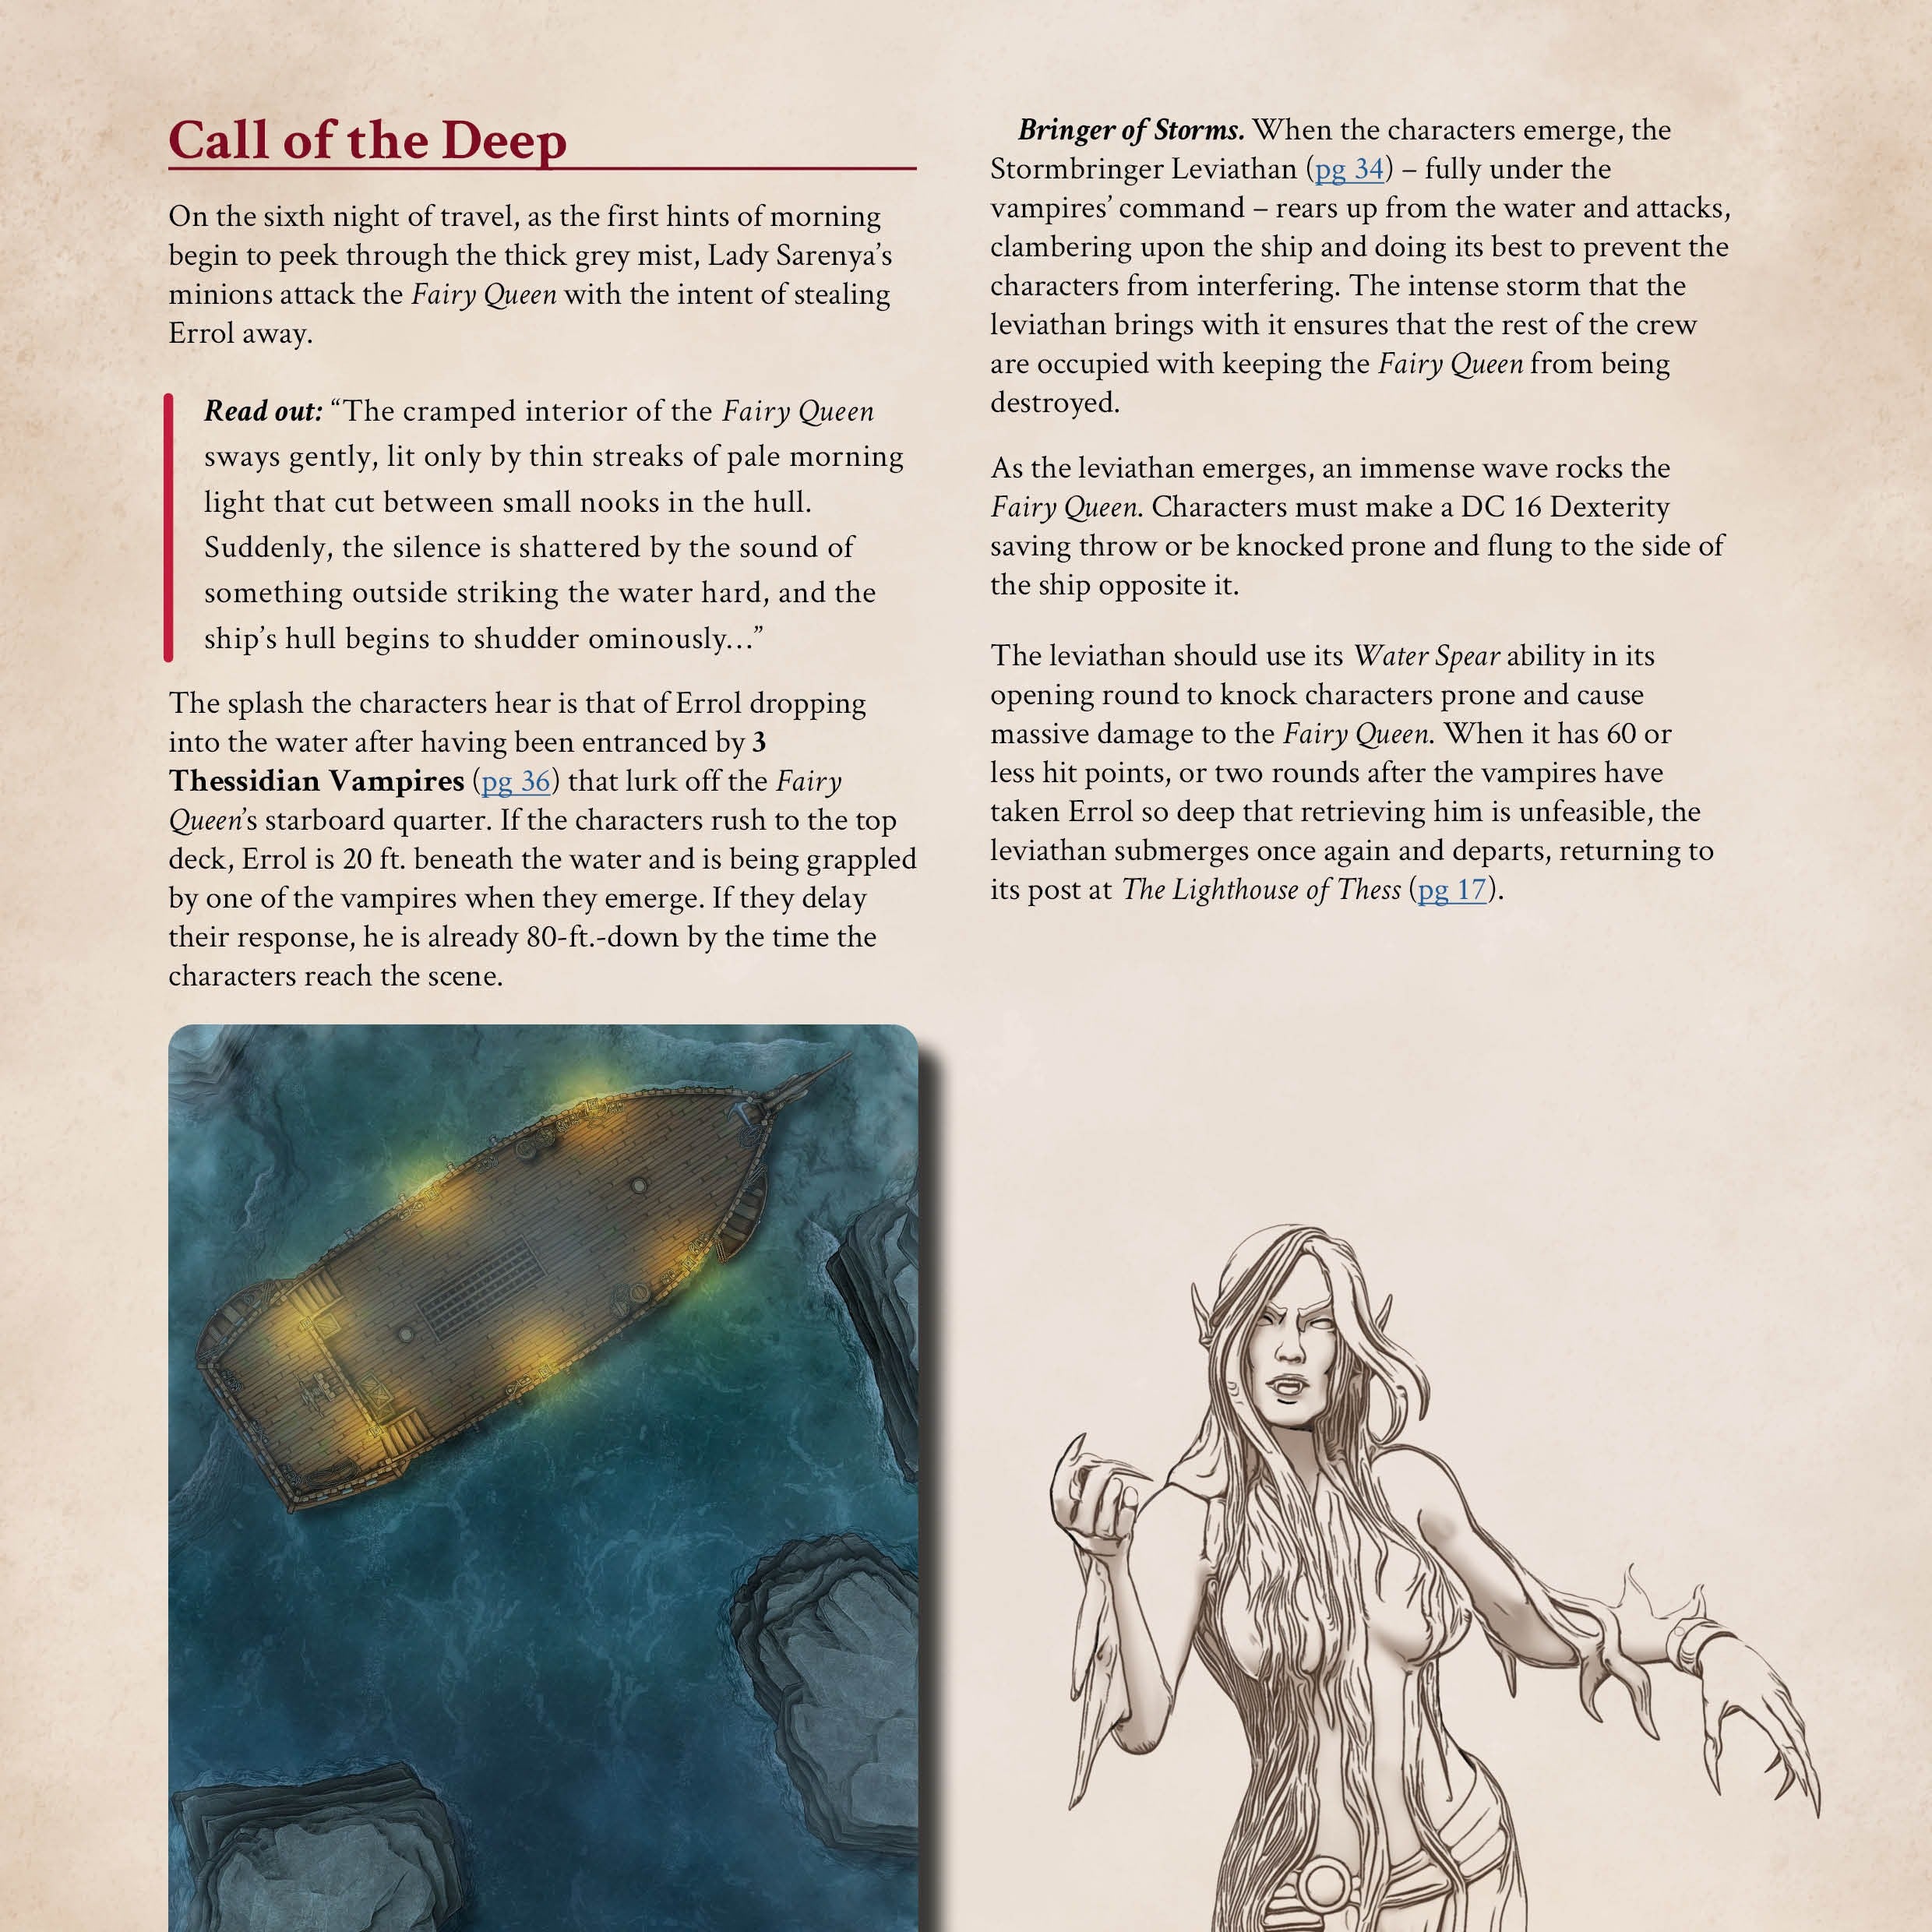 Bloodlords of the Deep - Physical 5e Adventure Booklet